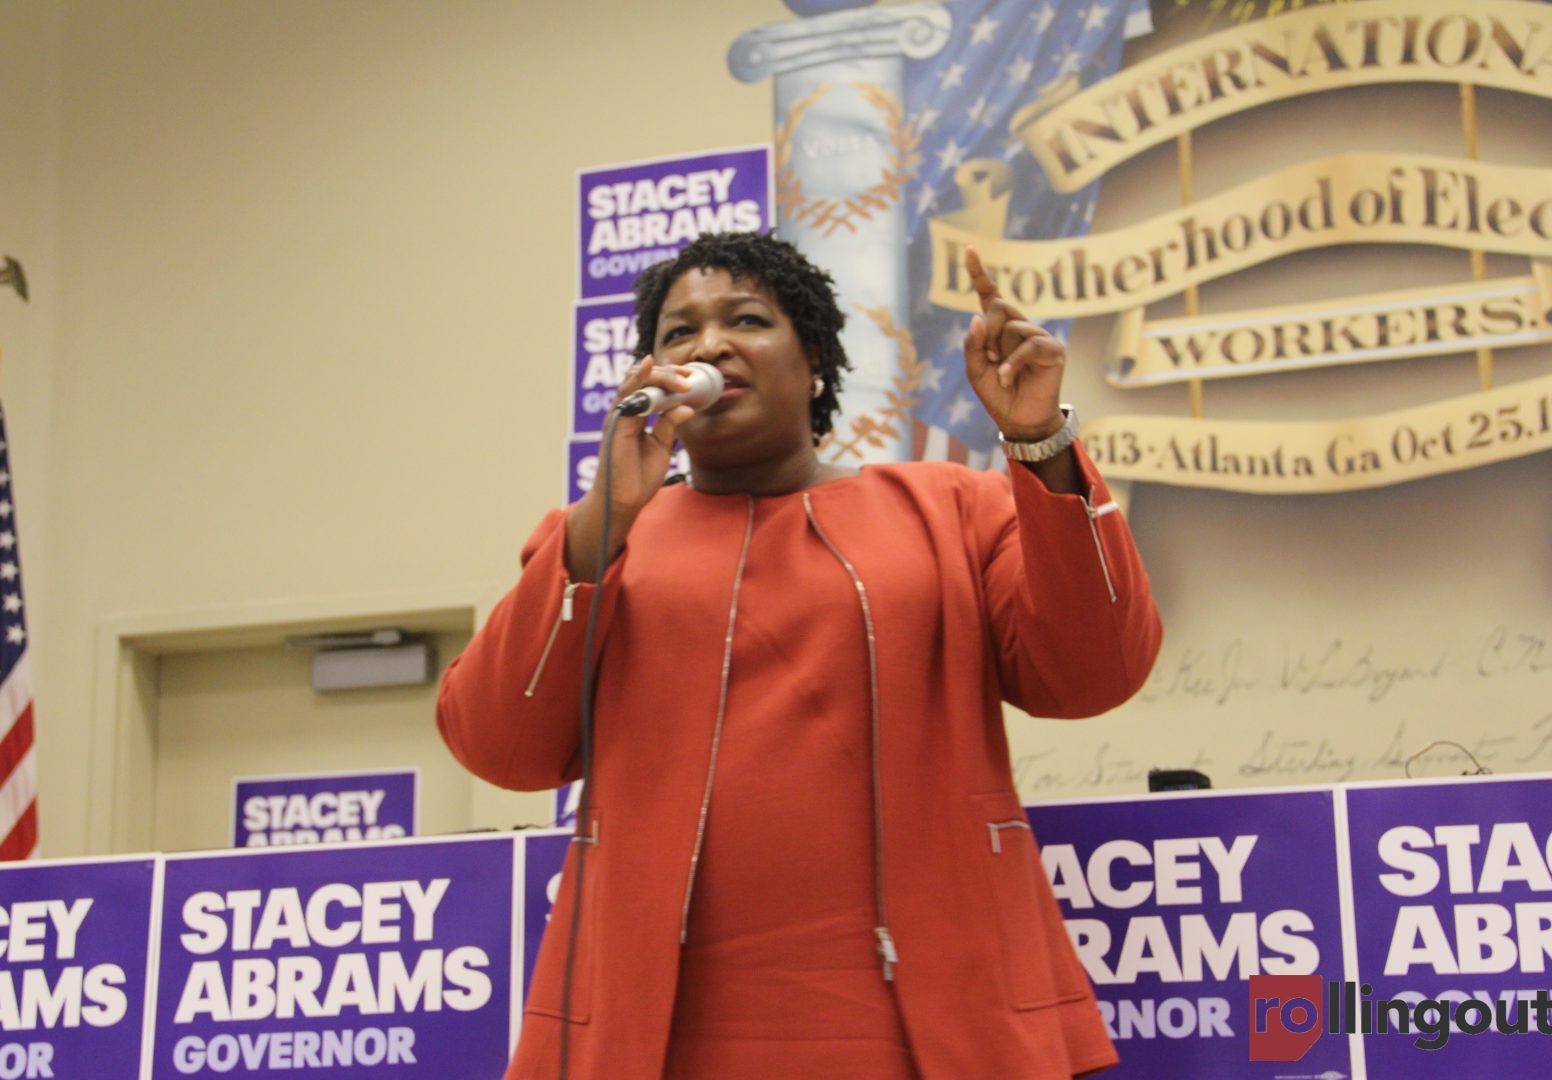 Stacey Abrams trails in early voting poll; every voter needs to show up